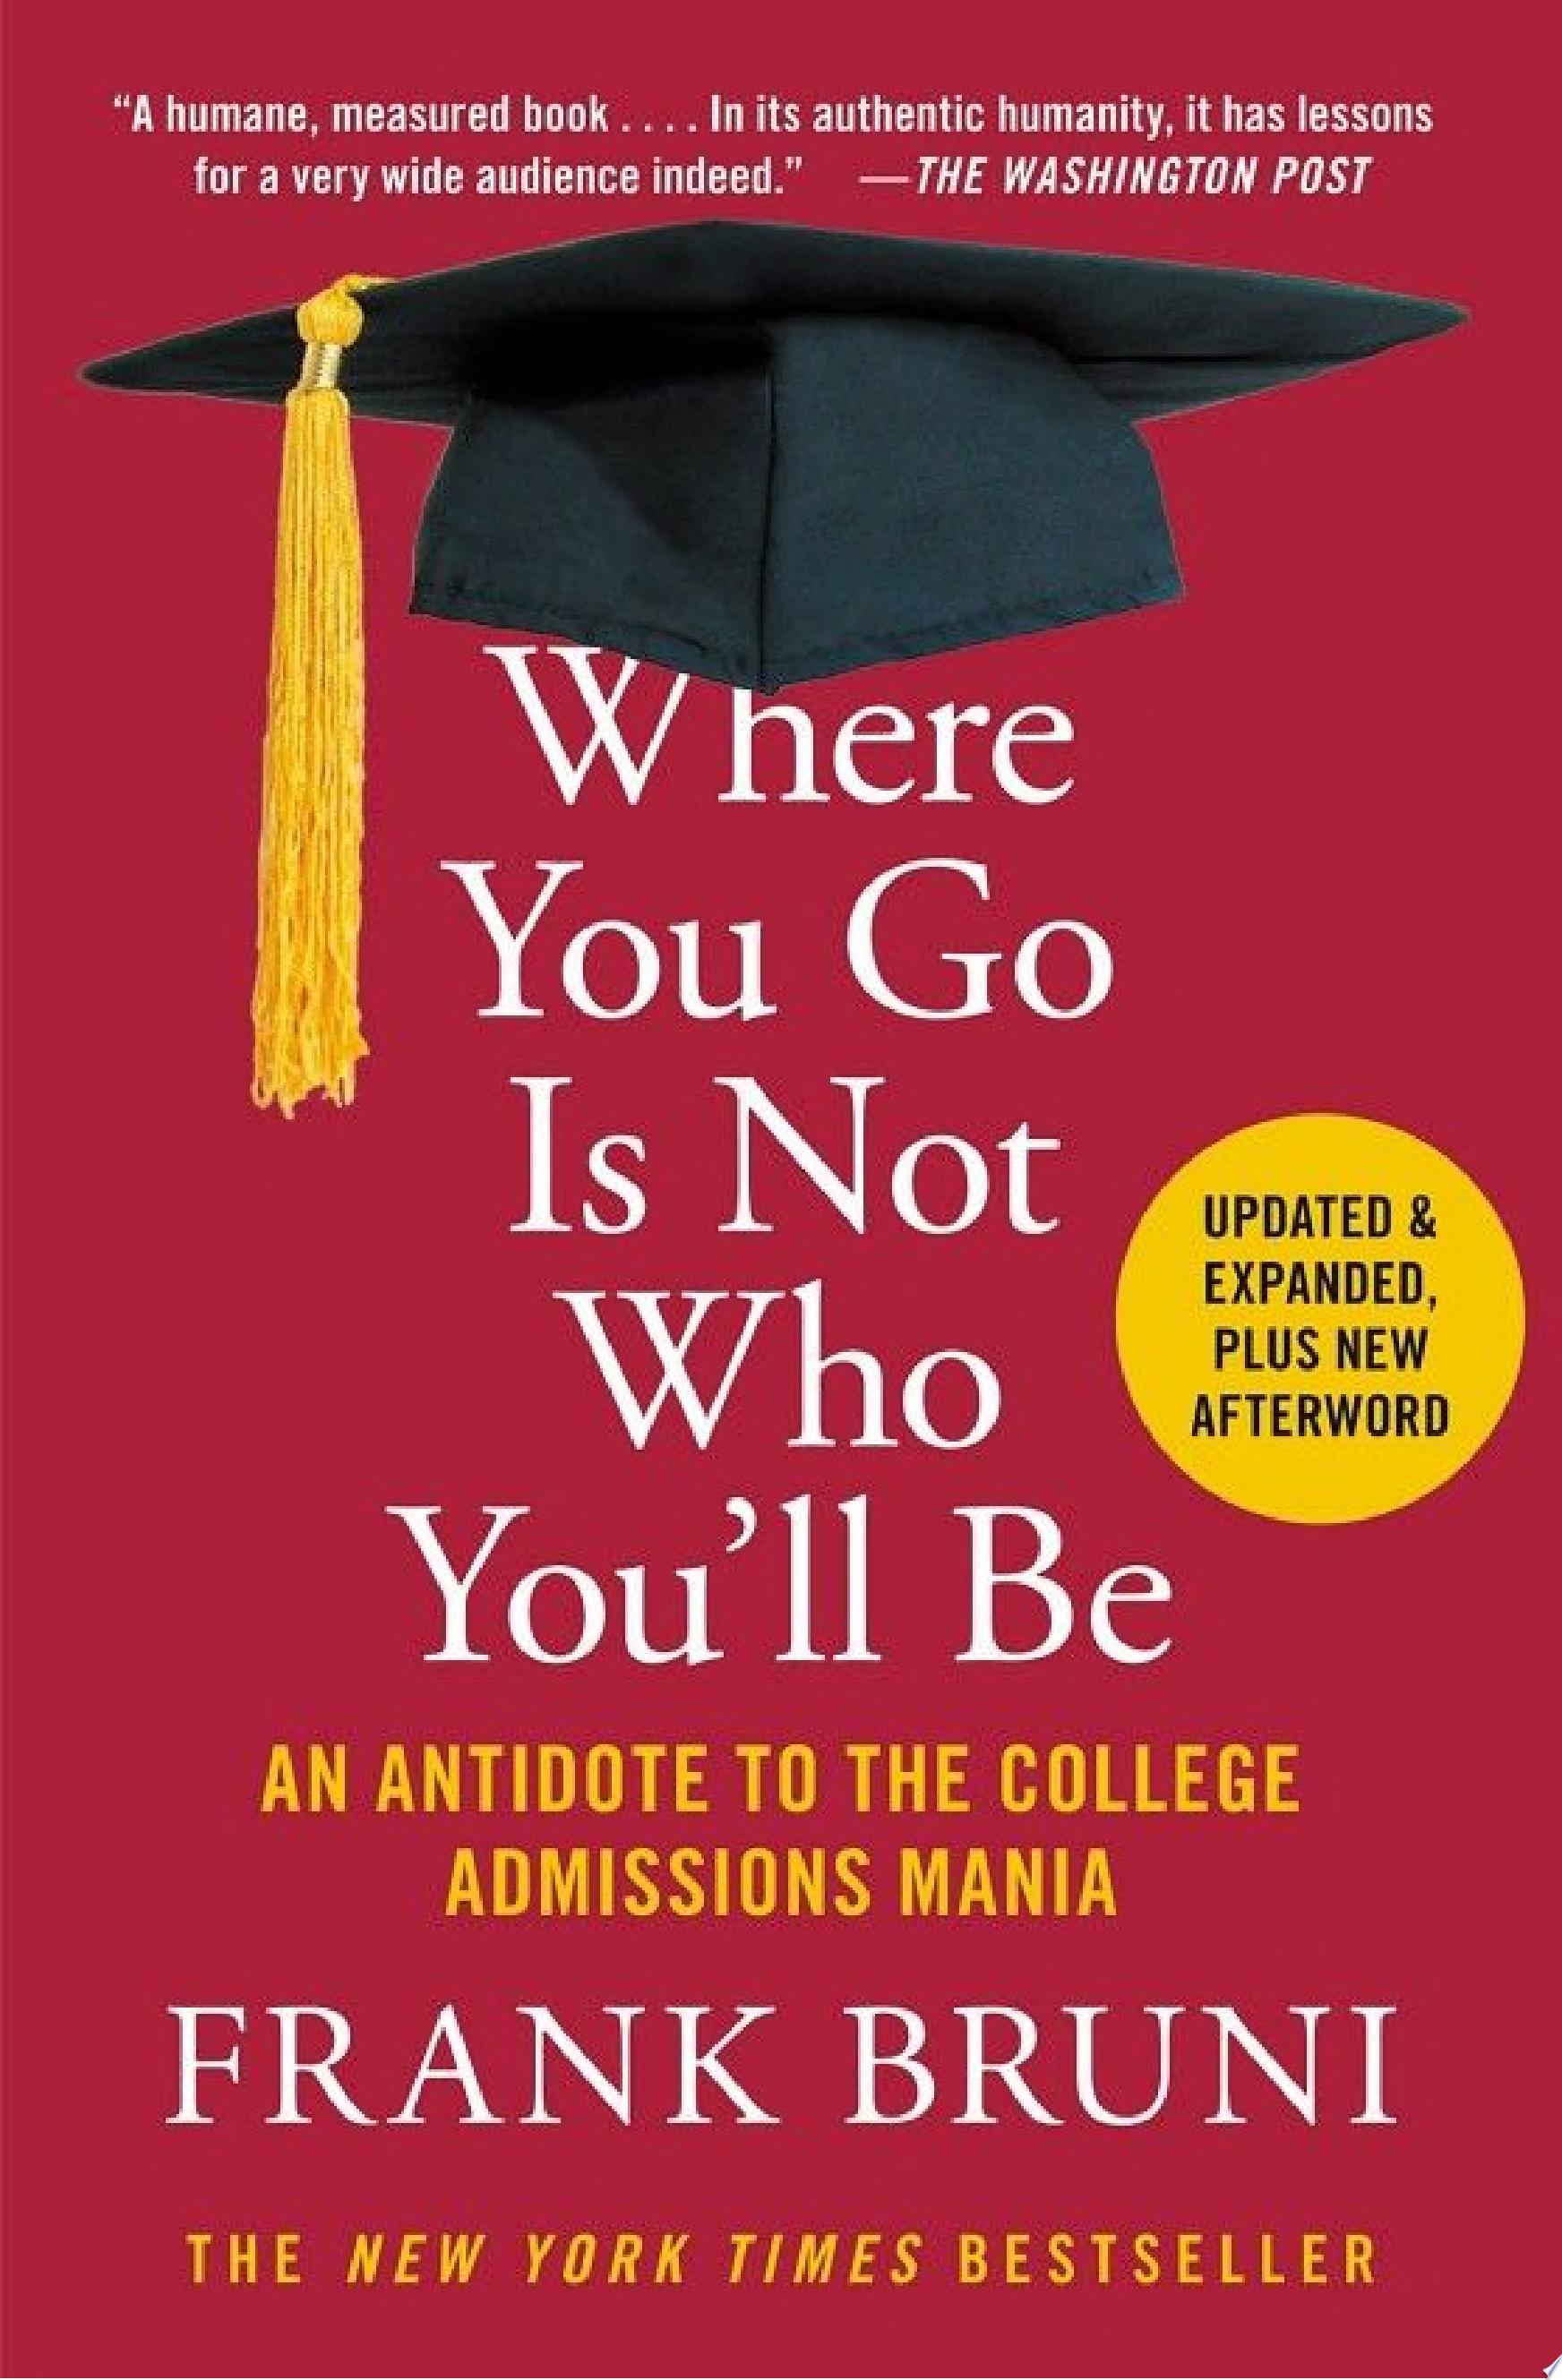 Image for "Where You Go Is Not Who You'll Be"